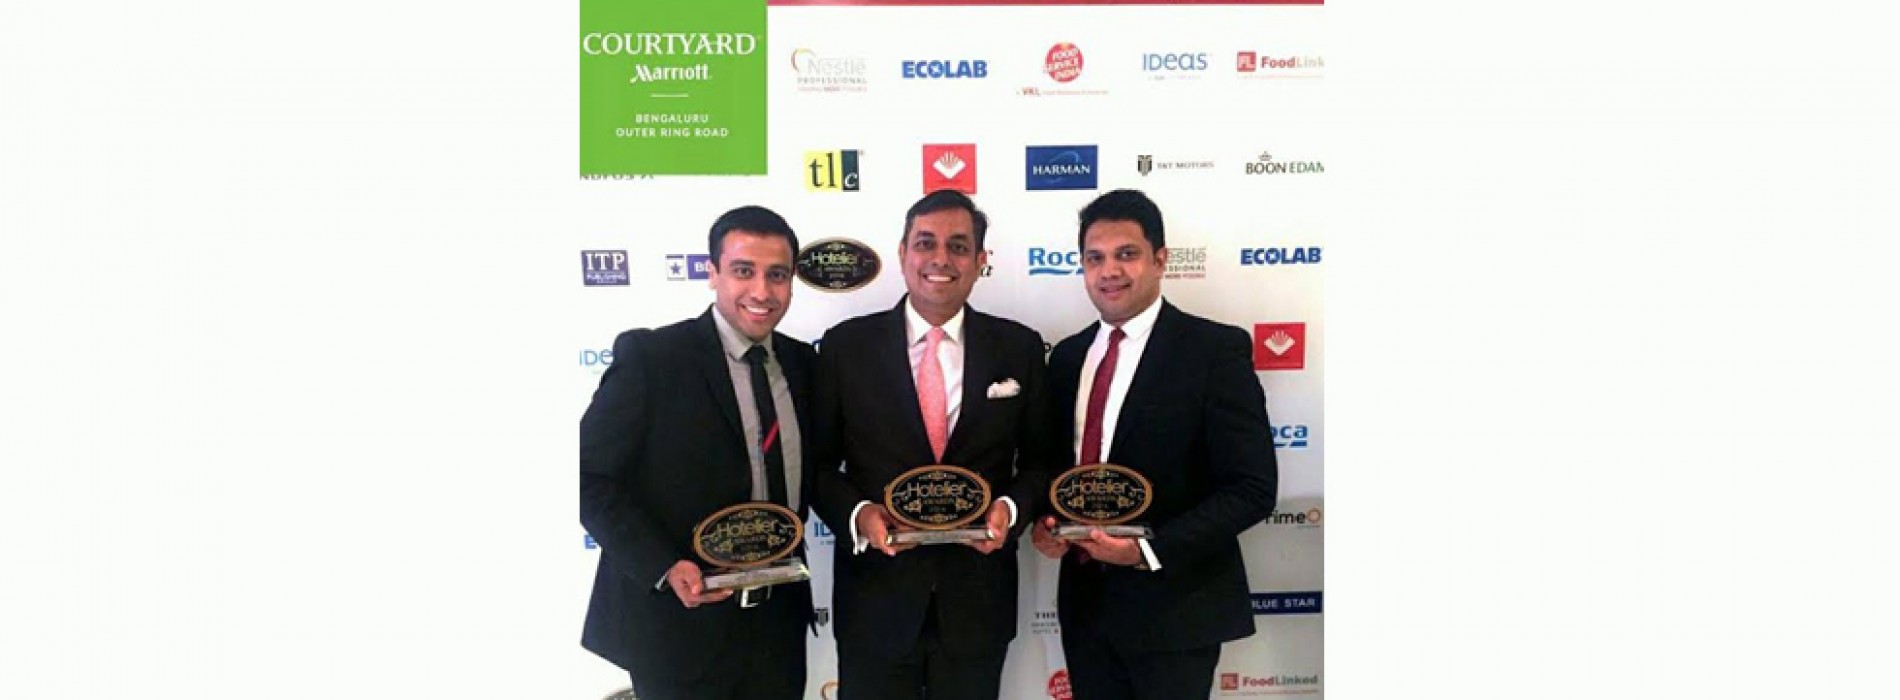 Courtyard by Marriott and Fairfield by Marriott Outer Ring Road, win at the ‘Hotelier India Awards’ 2016